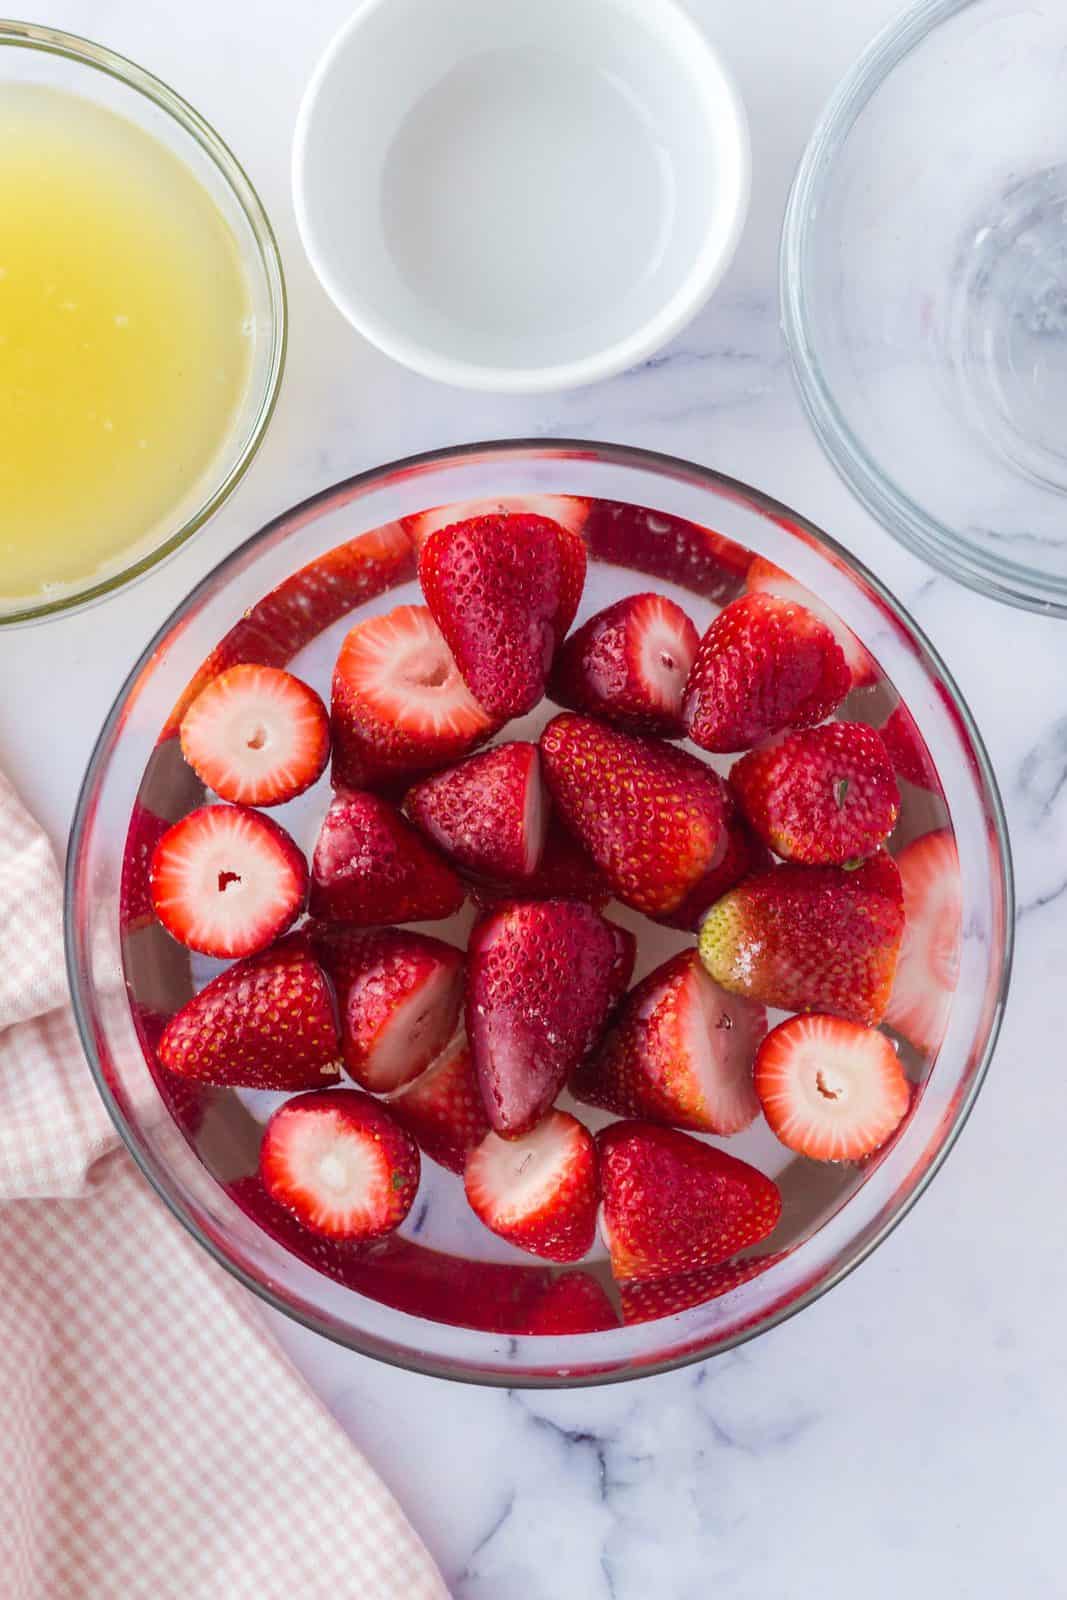 Water, sugar and strawberries in bowl.